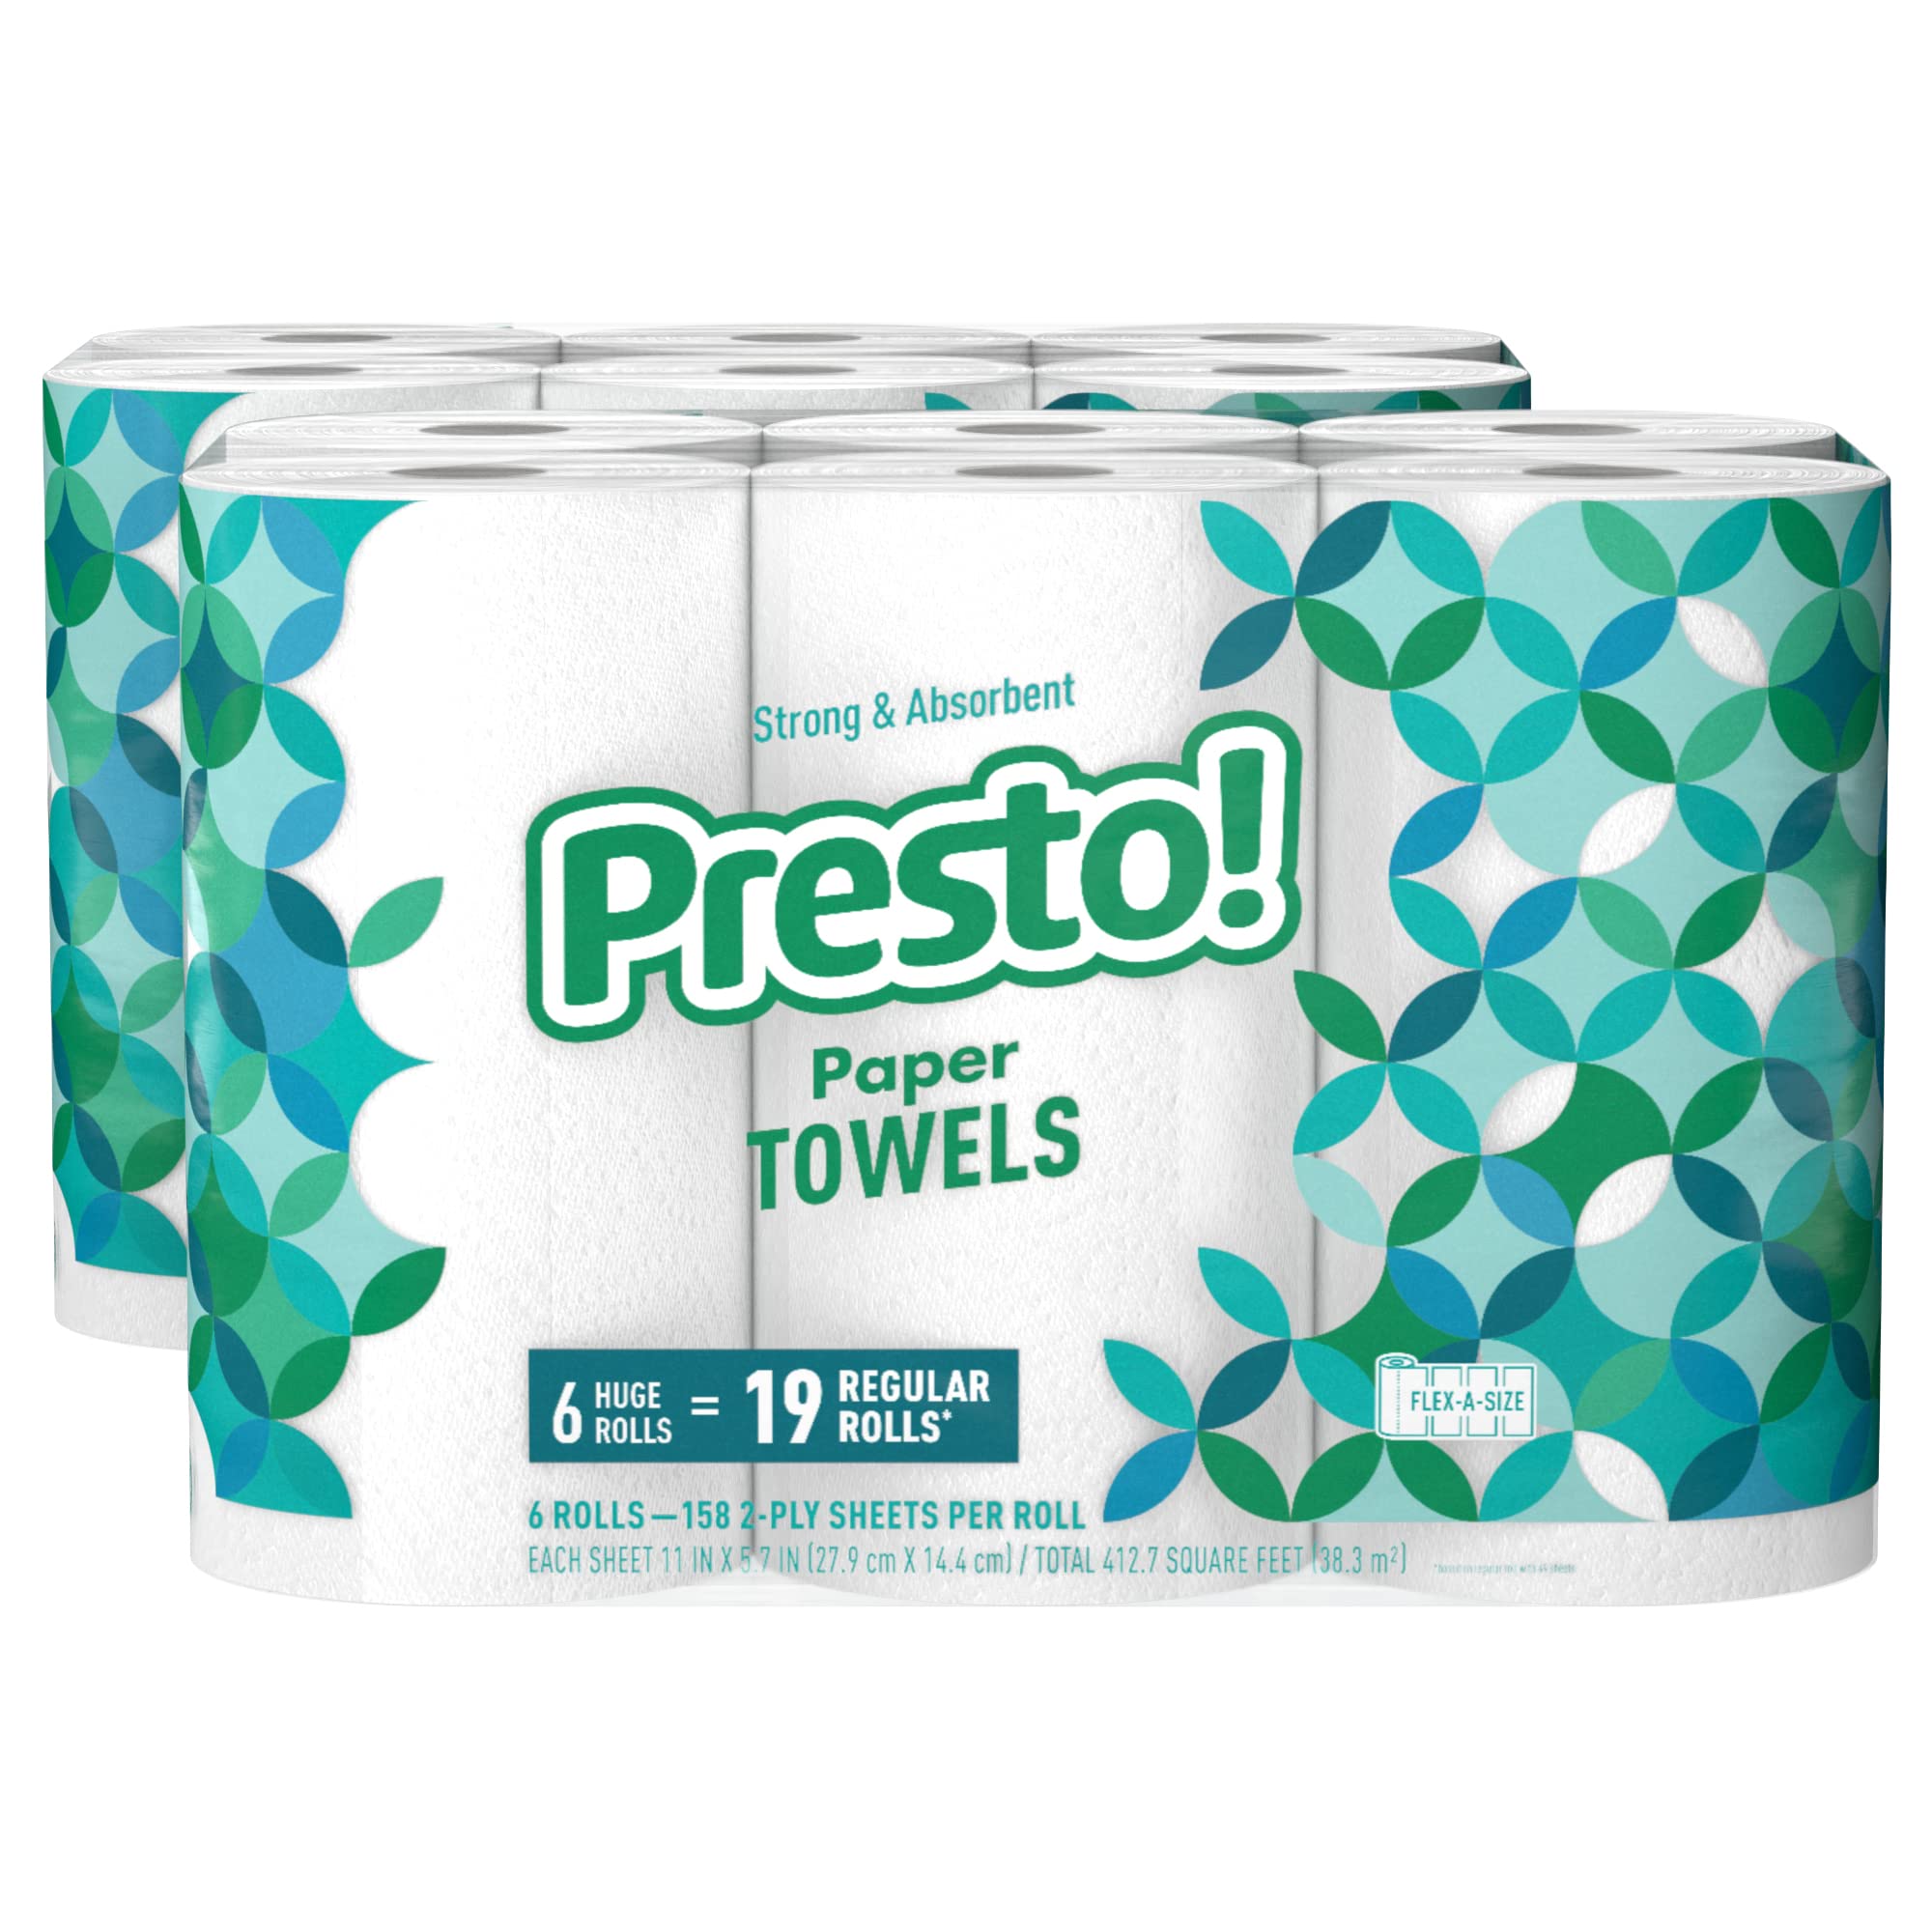 Book Cover Amazon Brand - Presto! Flex-a-Size Paper Towels, 158 Sheet Huge Roll, 12 Rolls (2 Packs of 6), Equivalent to 38 Regular Rolls, White 6 Count (Pack of 2)